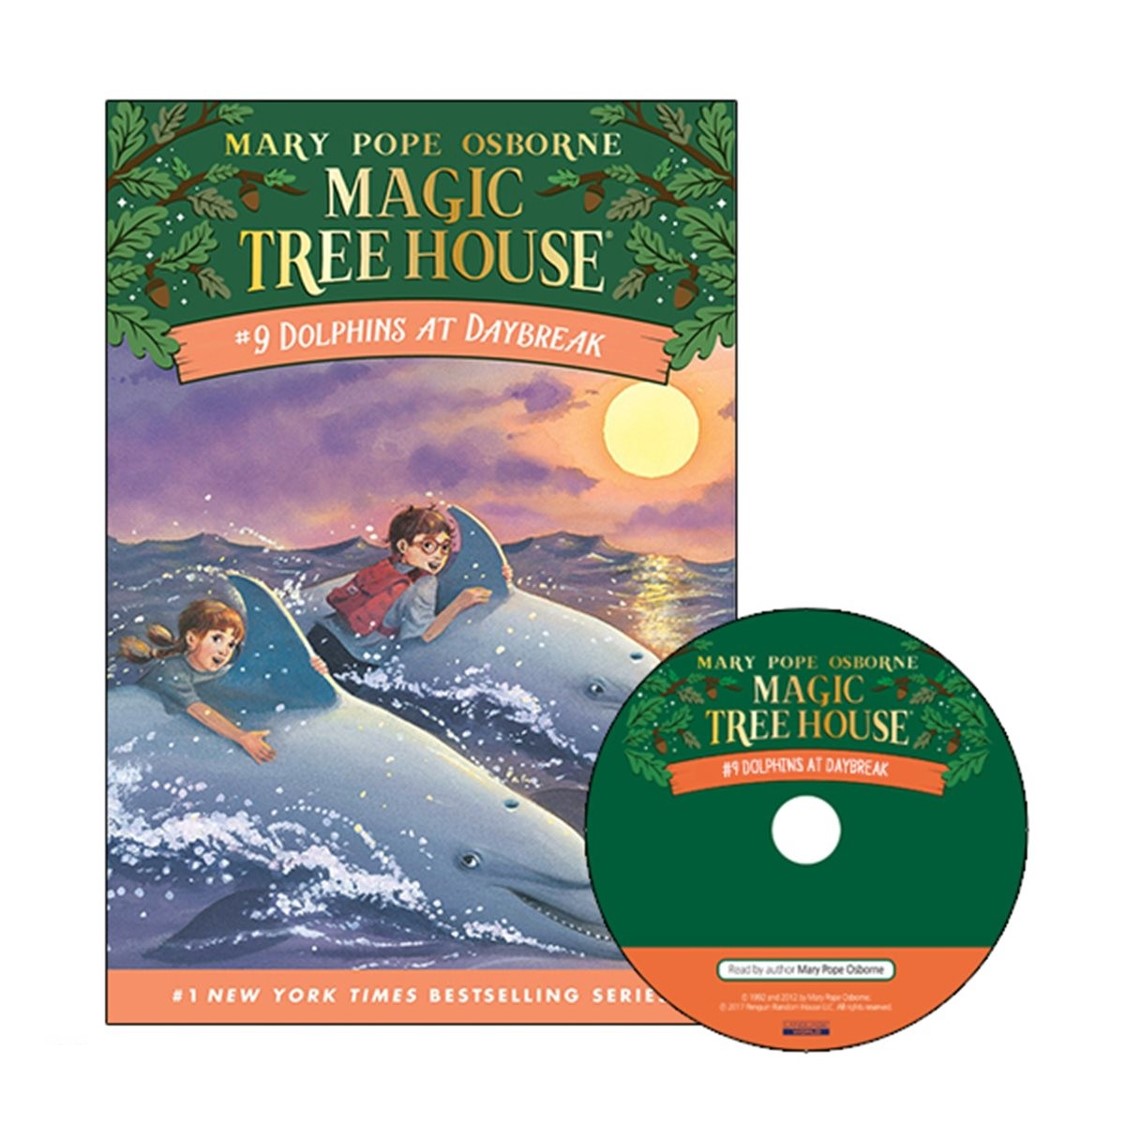 Magic Tree House #9 Dolphins At Daybreak (Paperback+Audio CD)